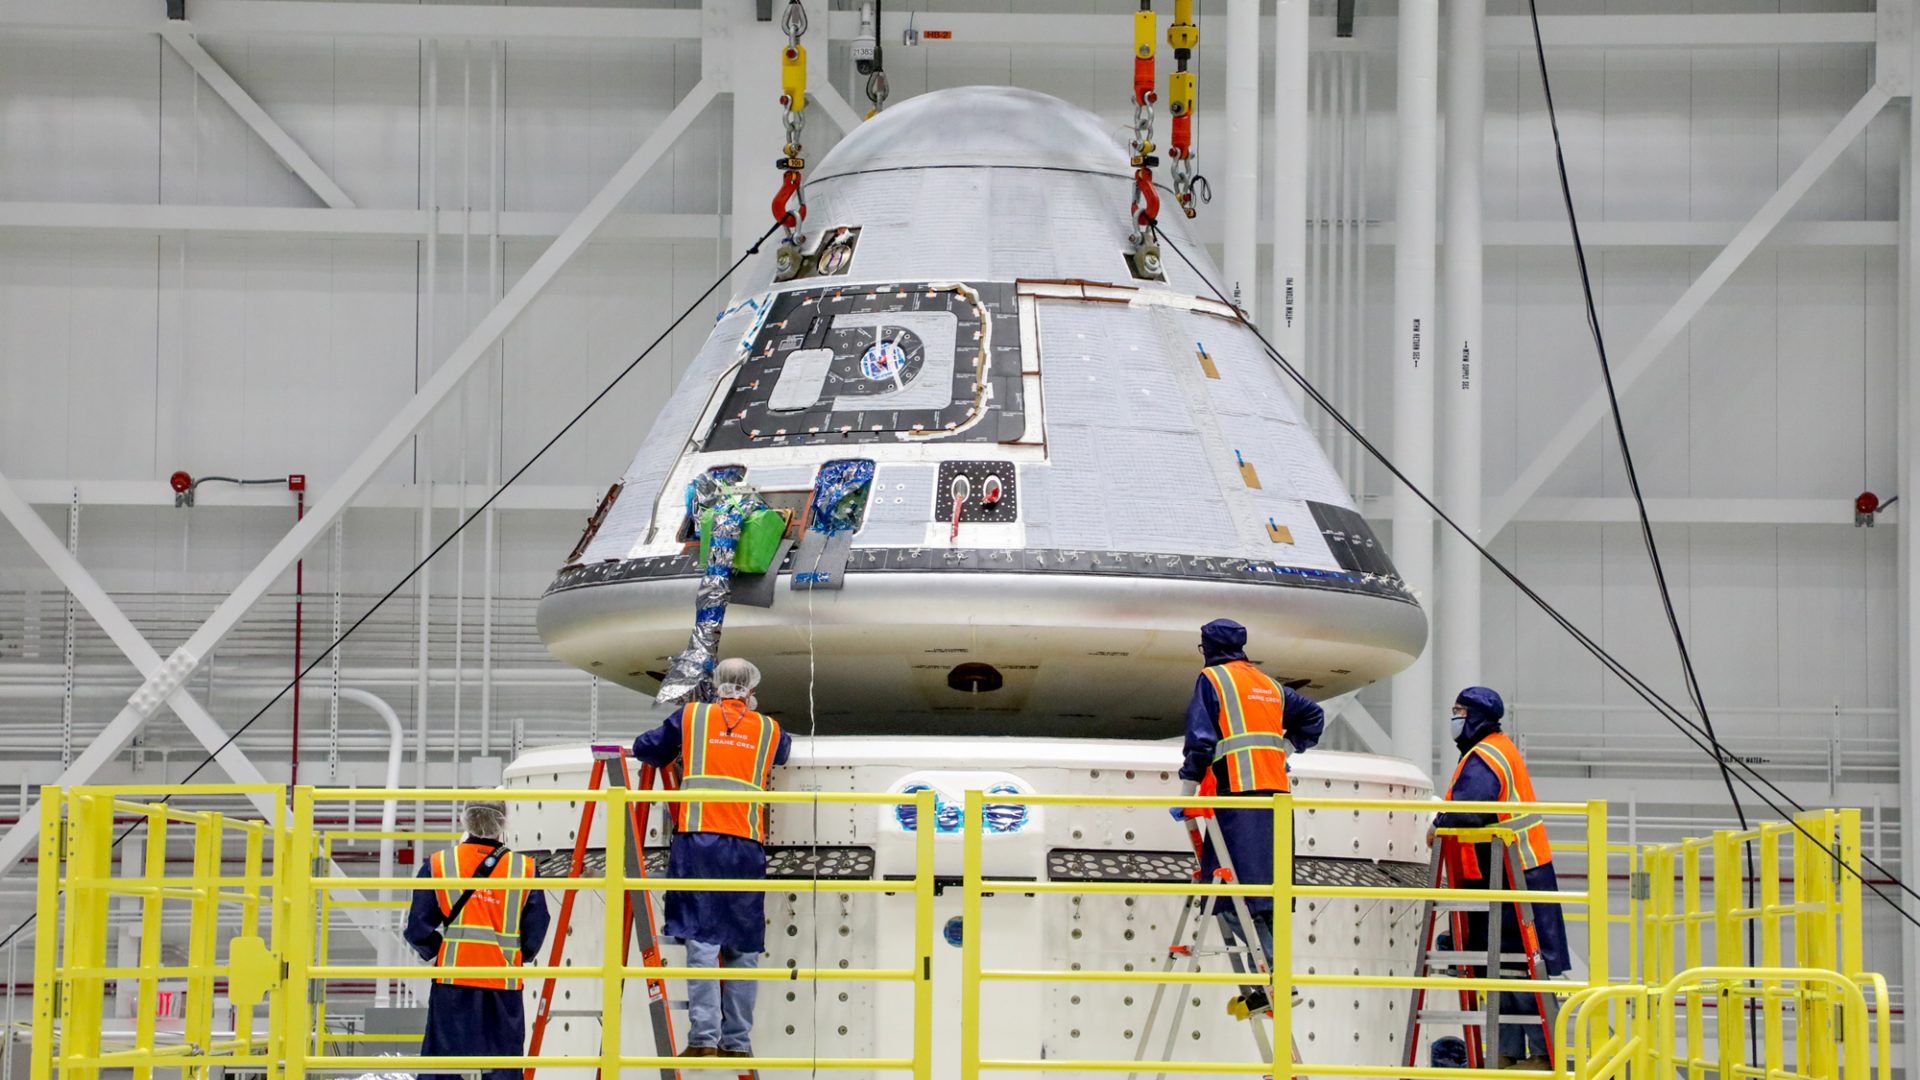 Boeing targets a March 25 originate for next Starliner take a look at flight for NASA